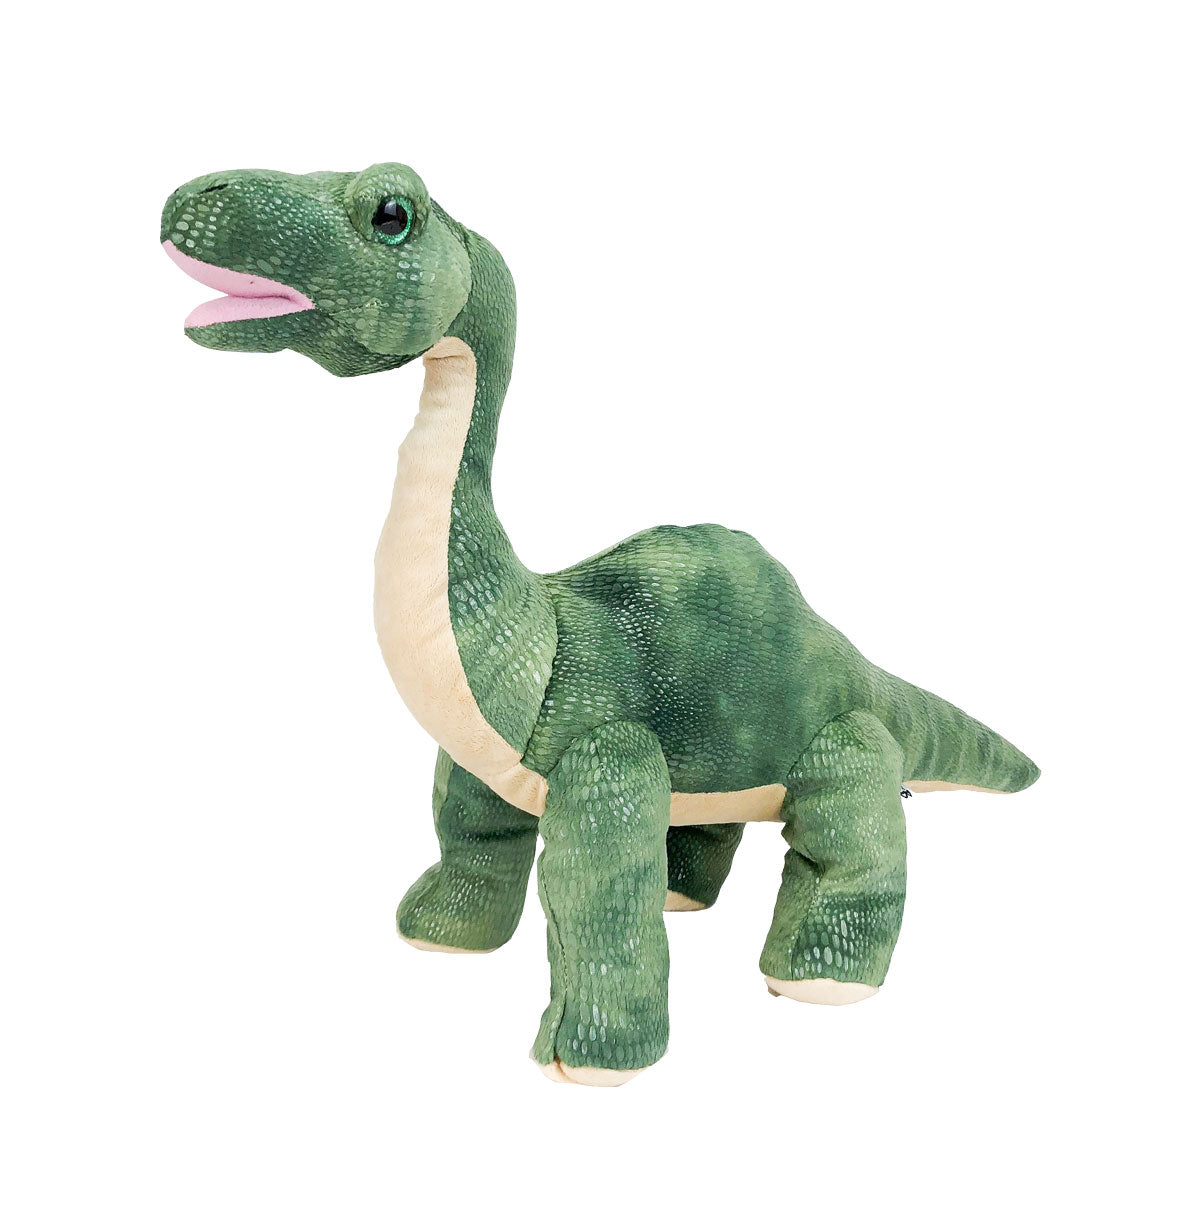 Dinosaur Stuffing Kit and Book Set by Book and Bear